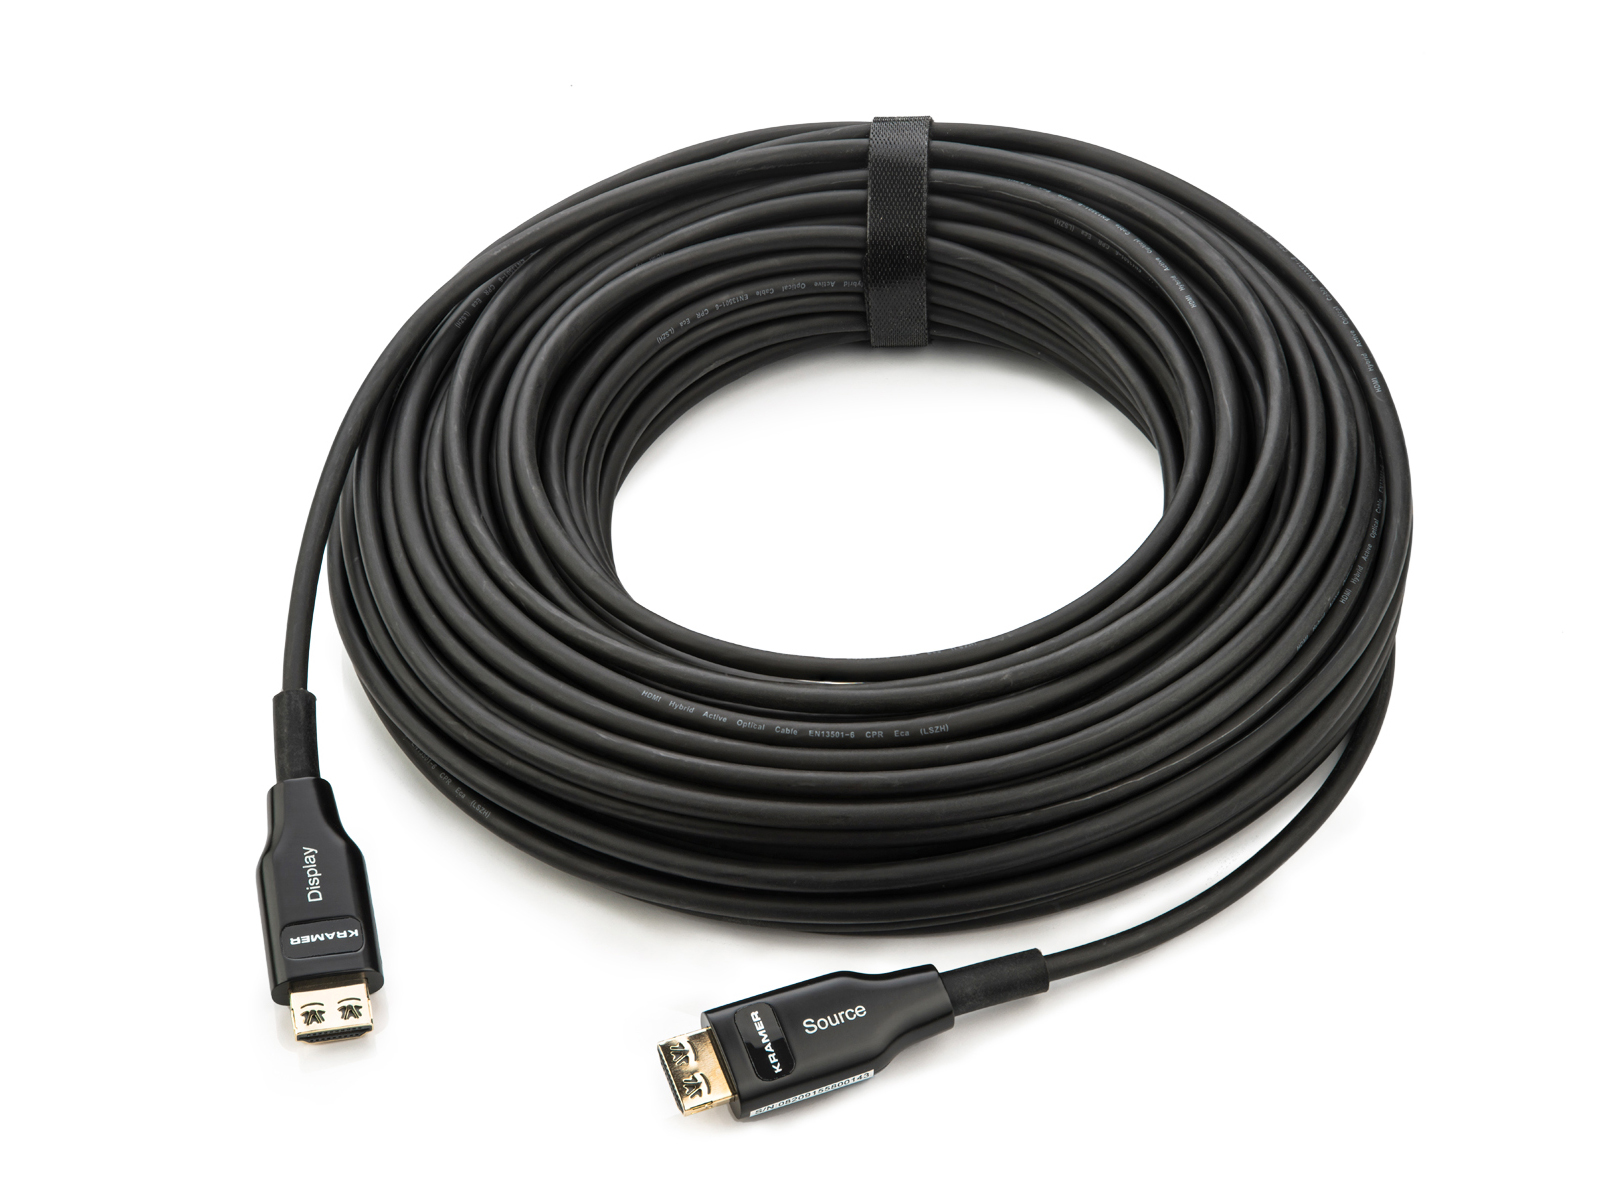 CP-AOCH/60F-50 15.2m/50ft High-Speed HDMI Optic Hybrid Cable - Plenum Rated by Kramer